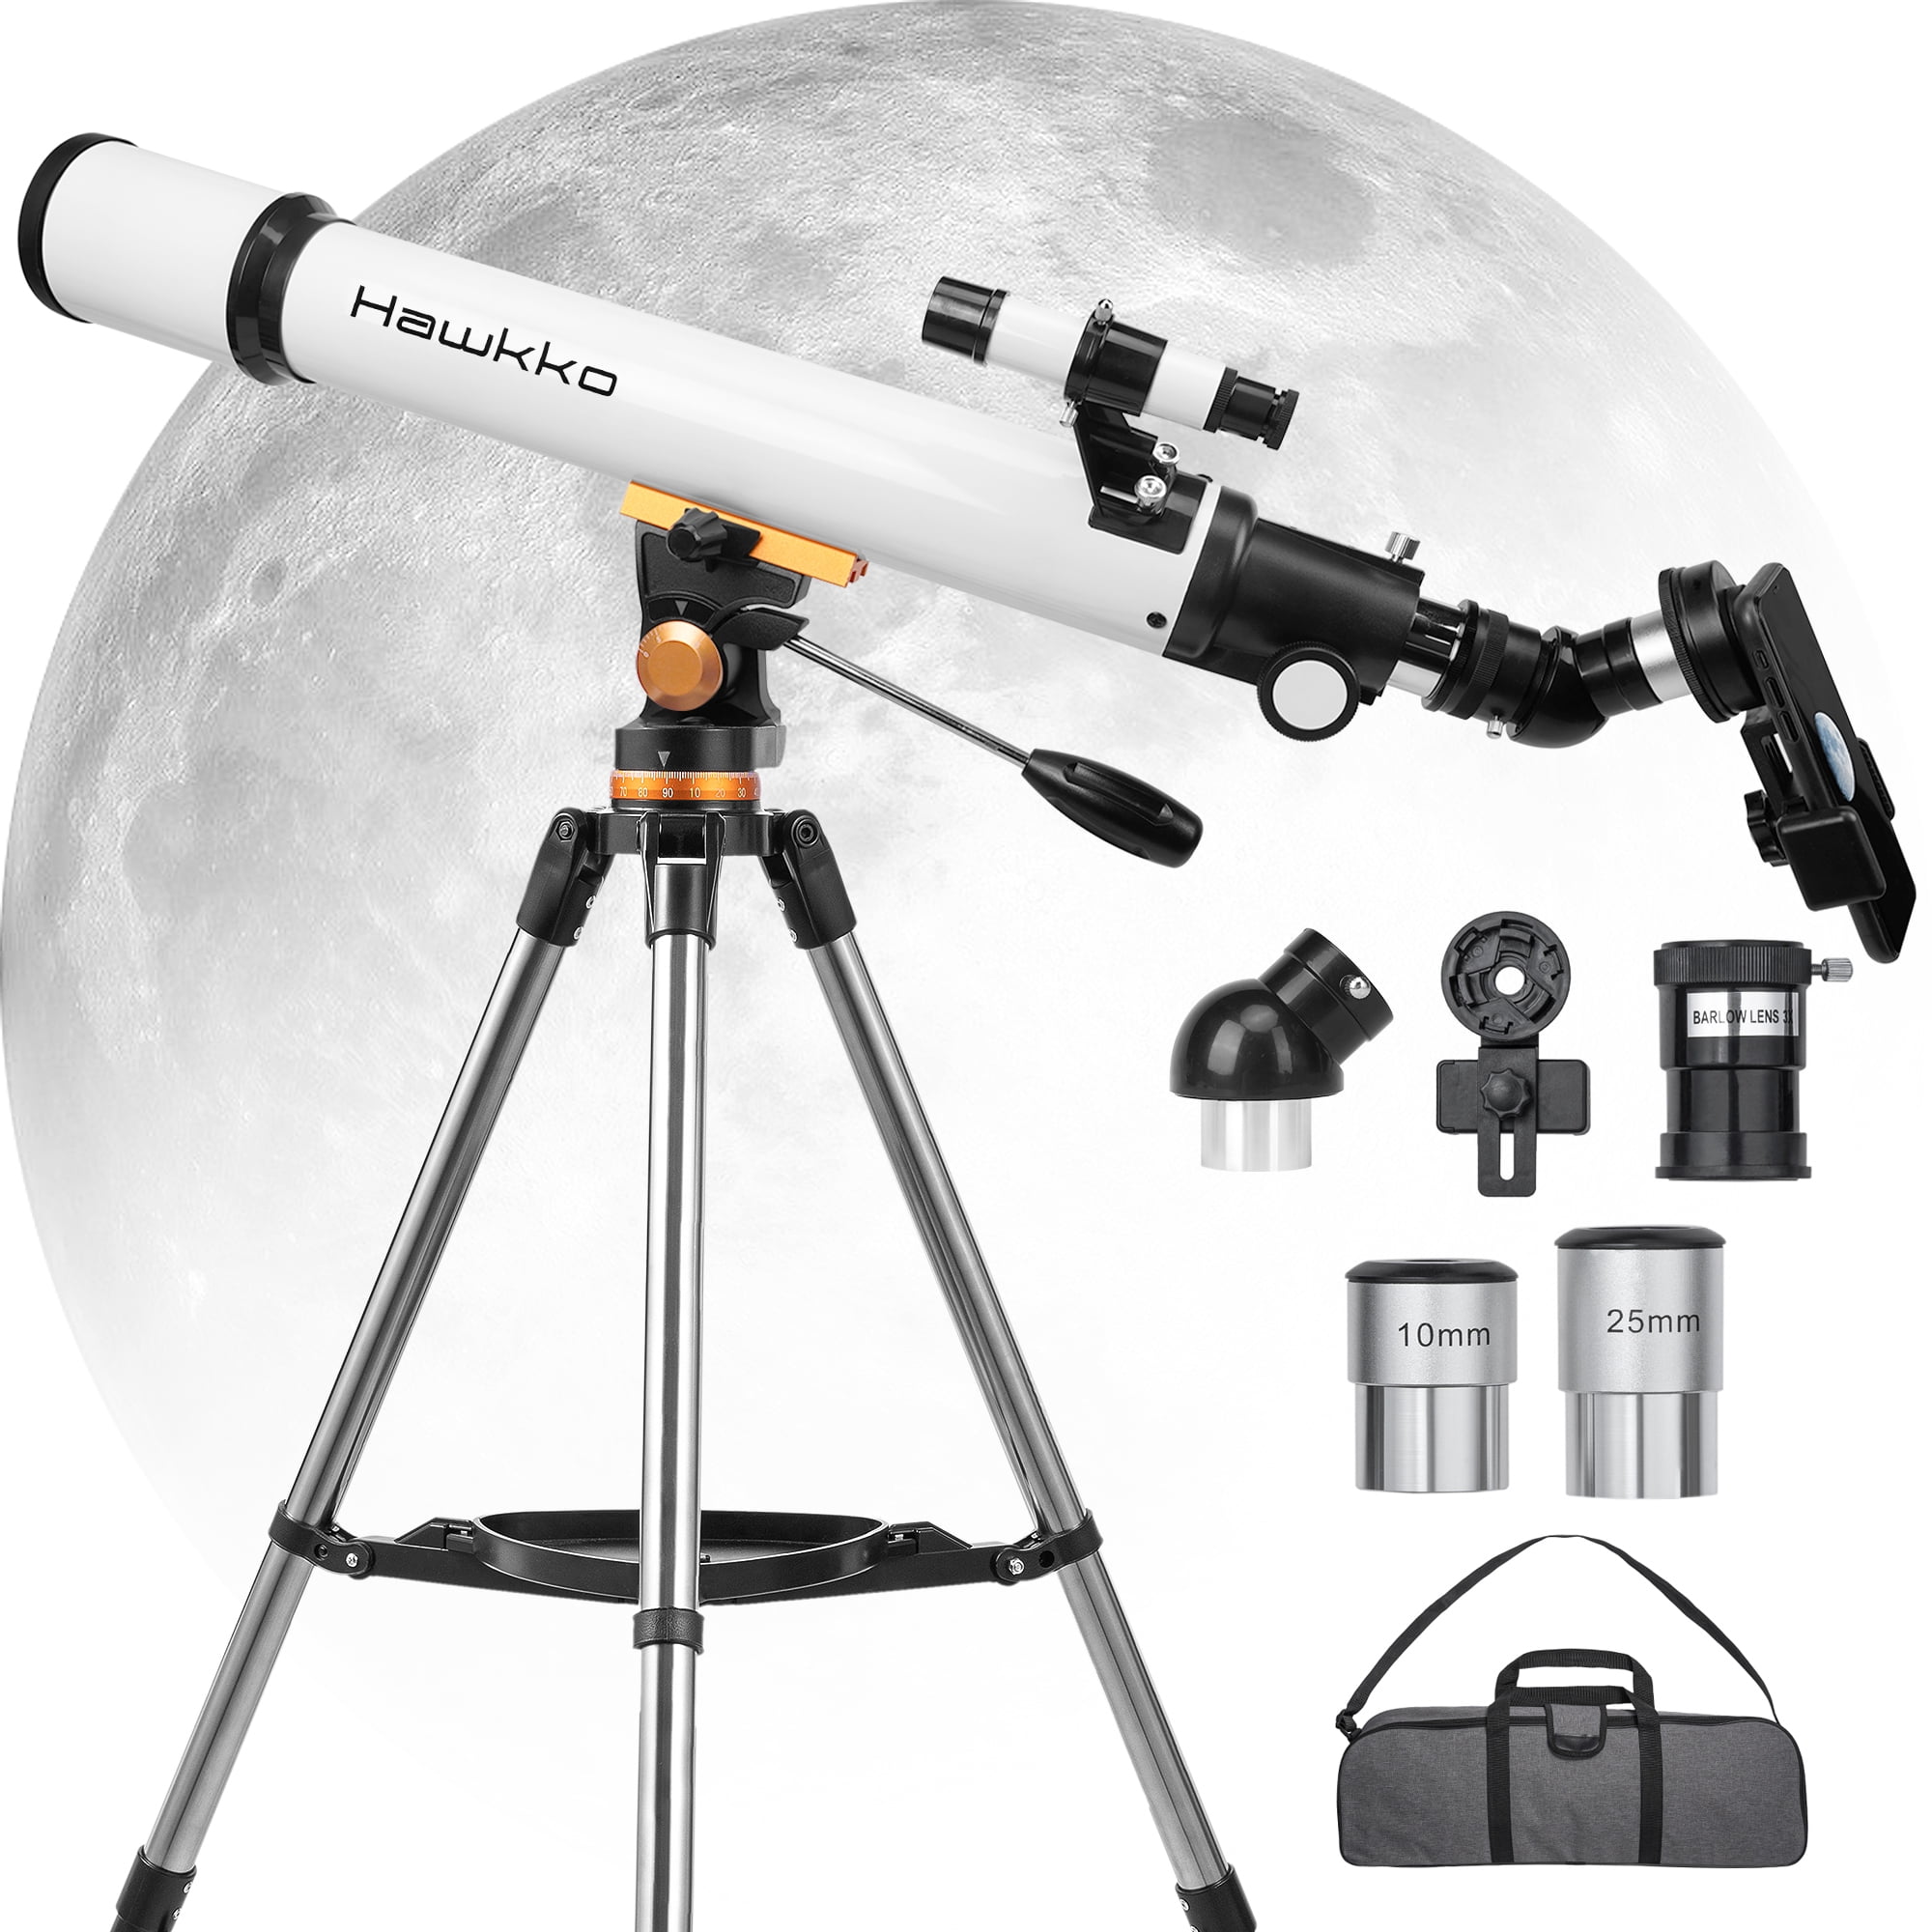 Telescope 70mm Apeture Travel Scope 400mm AZ Mount Good Partner to View Moon and Planet Good Travel Telescope with Backpack for Kids and Beginners 